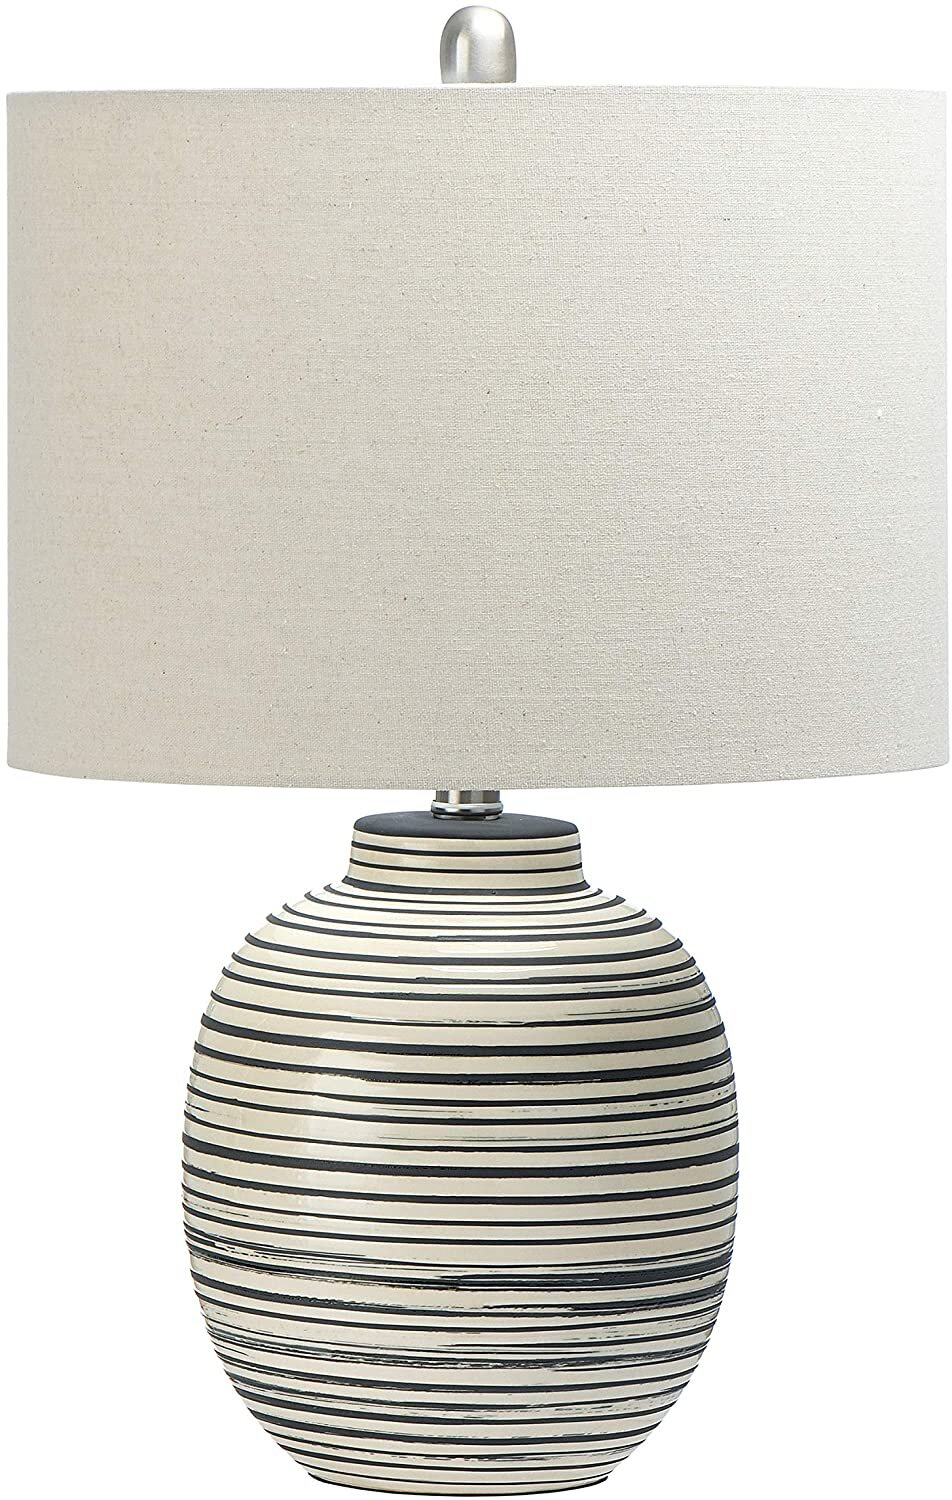 Creative Co op Ceramic Textured Striped Gray Table Lamp